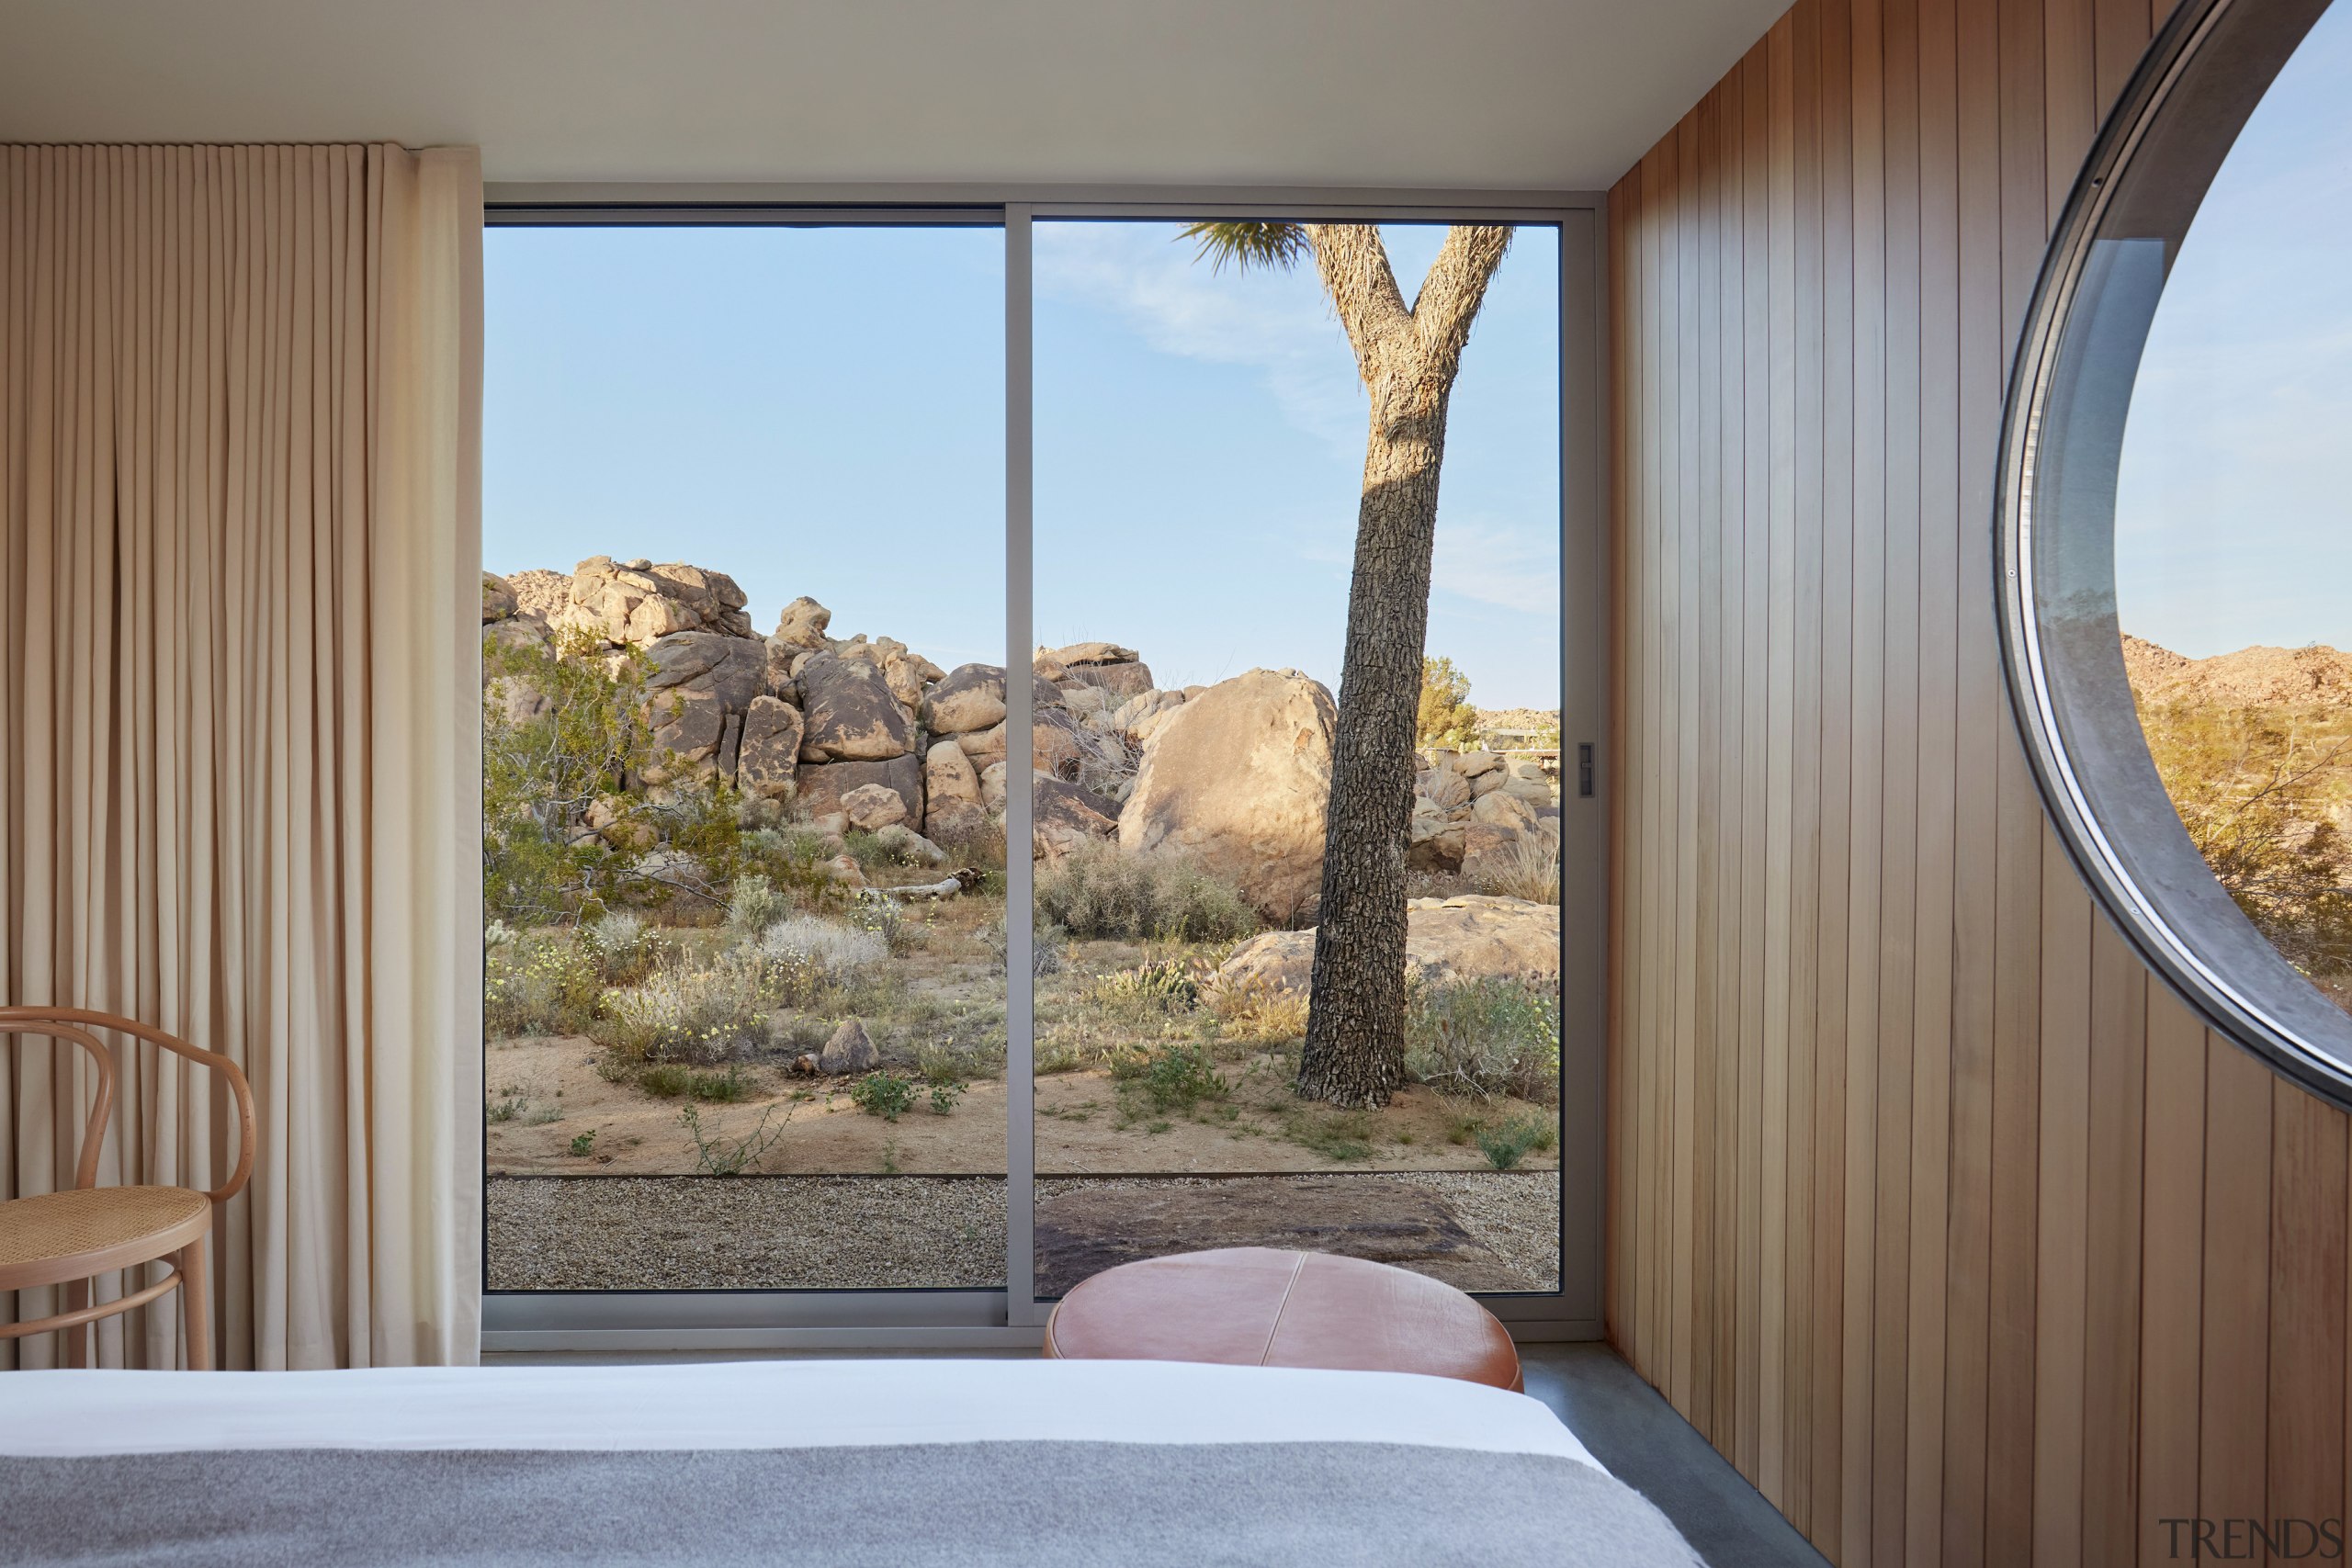 To say the home offers an immersive desert 